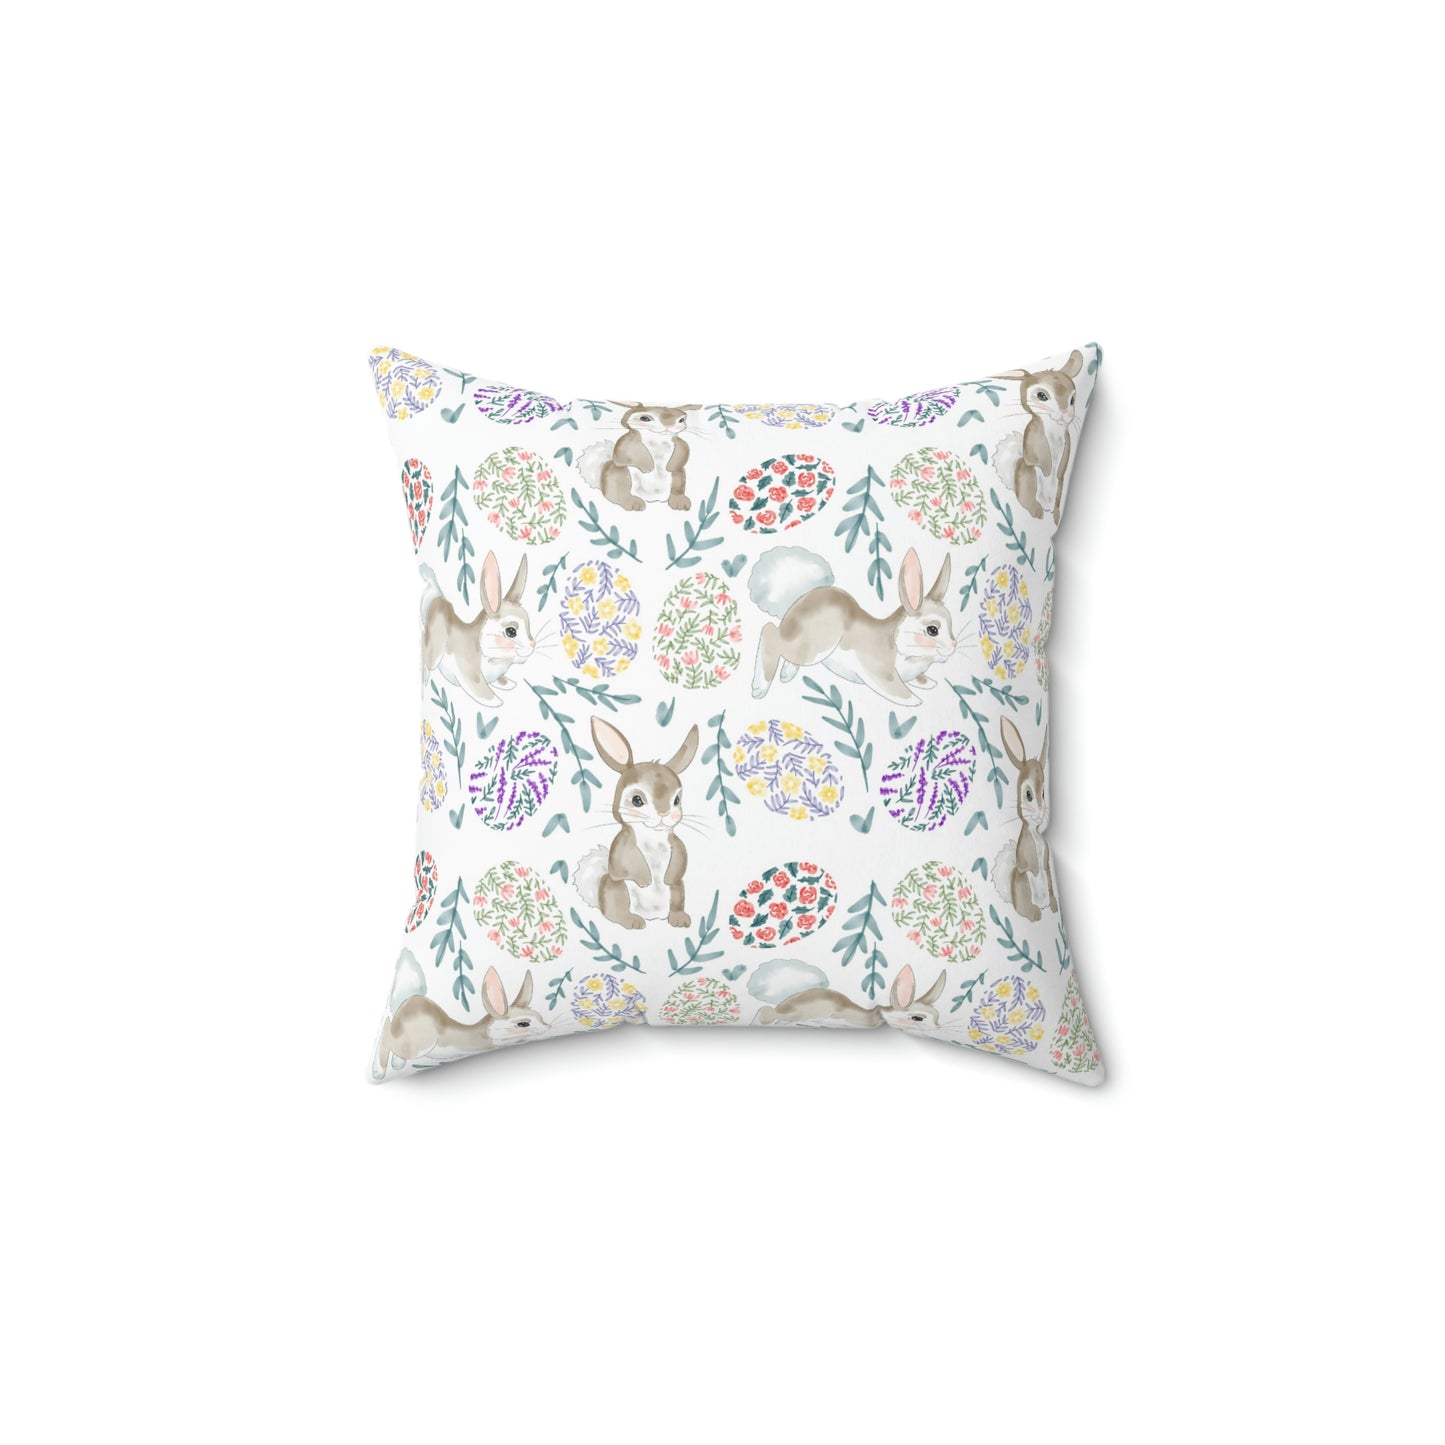 Bunnies and Easter Eggs Throw Pillow